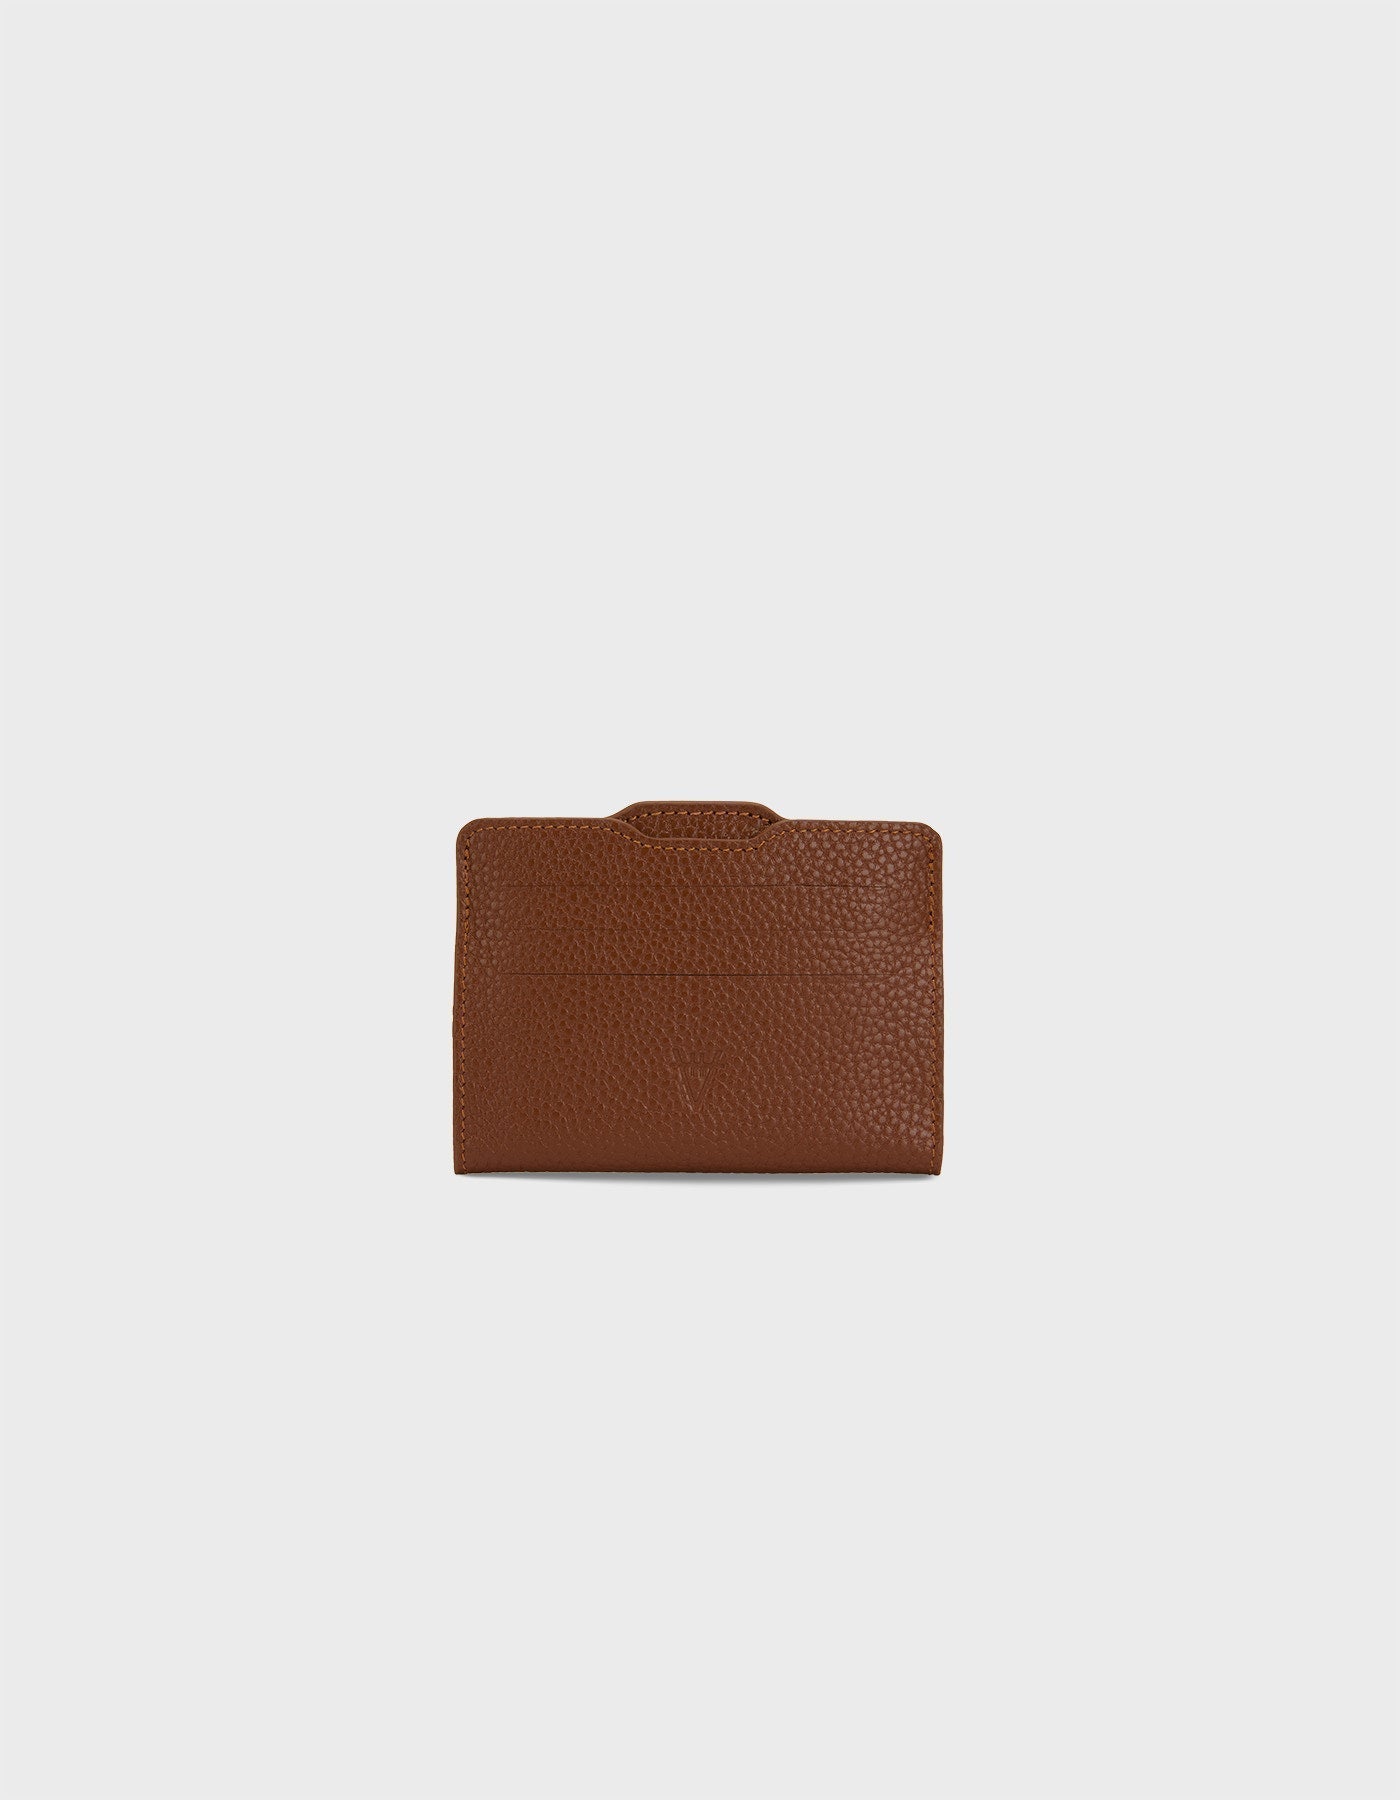 Double Card Holder - Finest Quality HiVa Atelier GmbH Leather Accessories